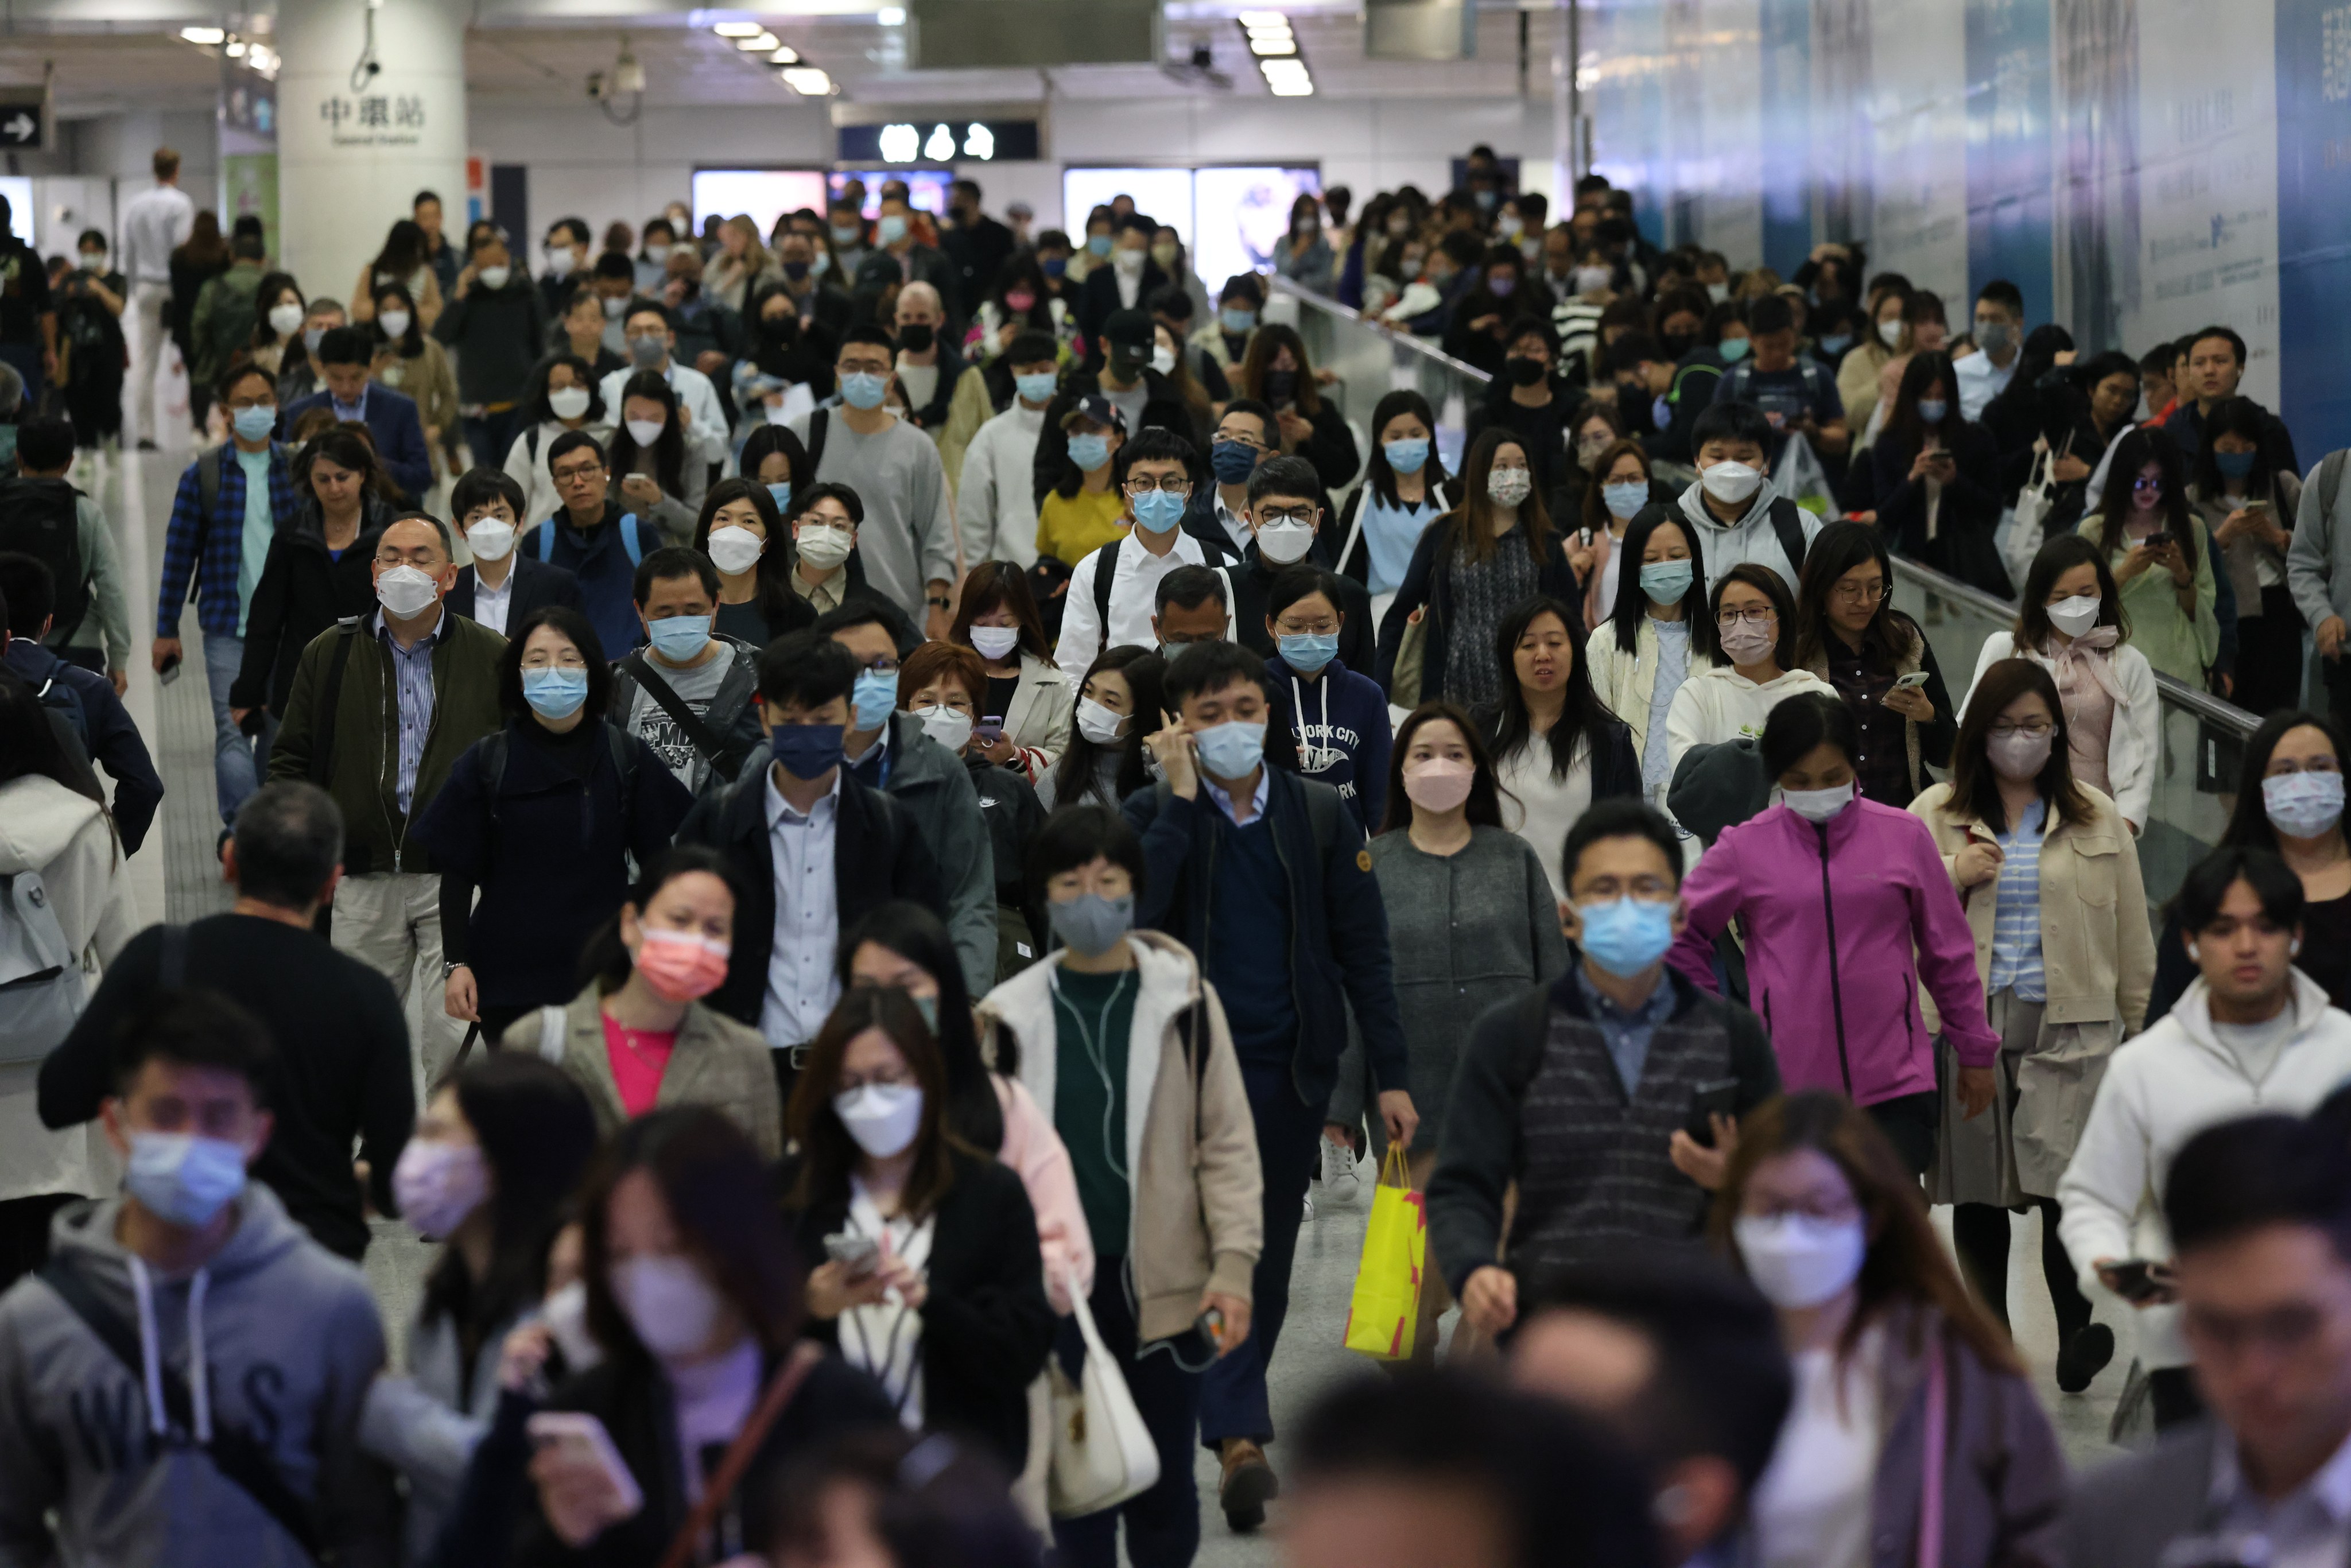 Commuters walking through the Central MTR station in Hong Kong on March 1. Hong Kong must protect its reputation as an open and welcoming place. Photo: May Tse